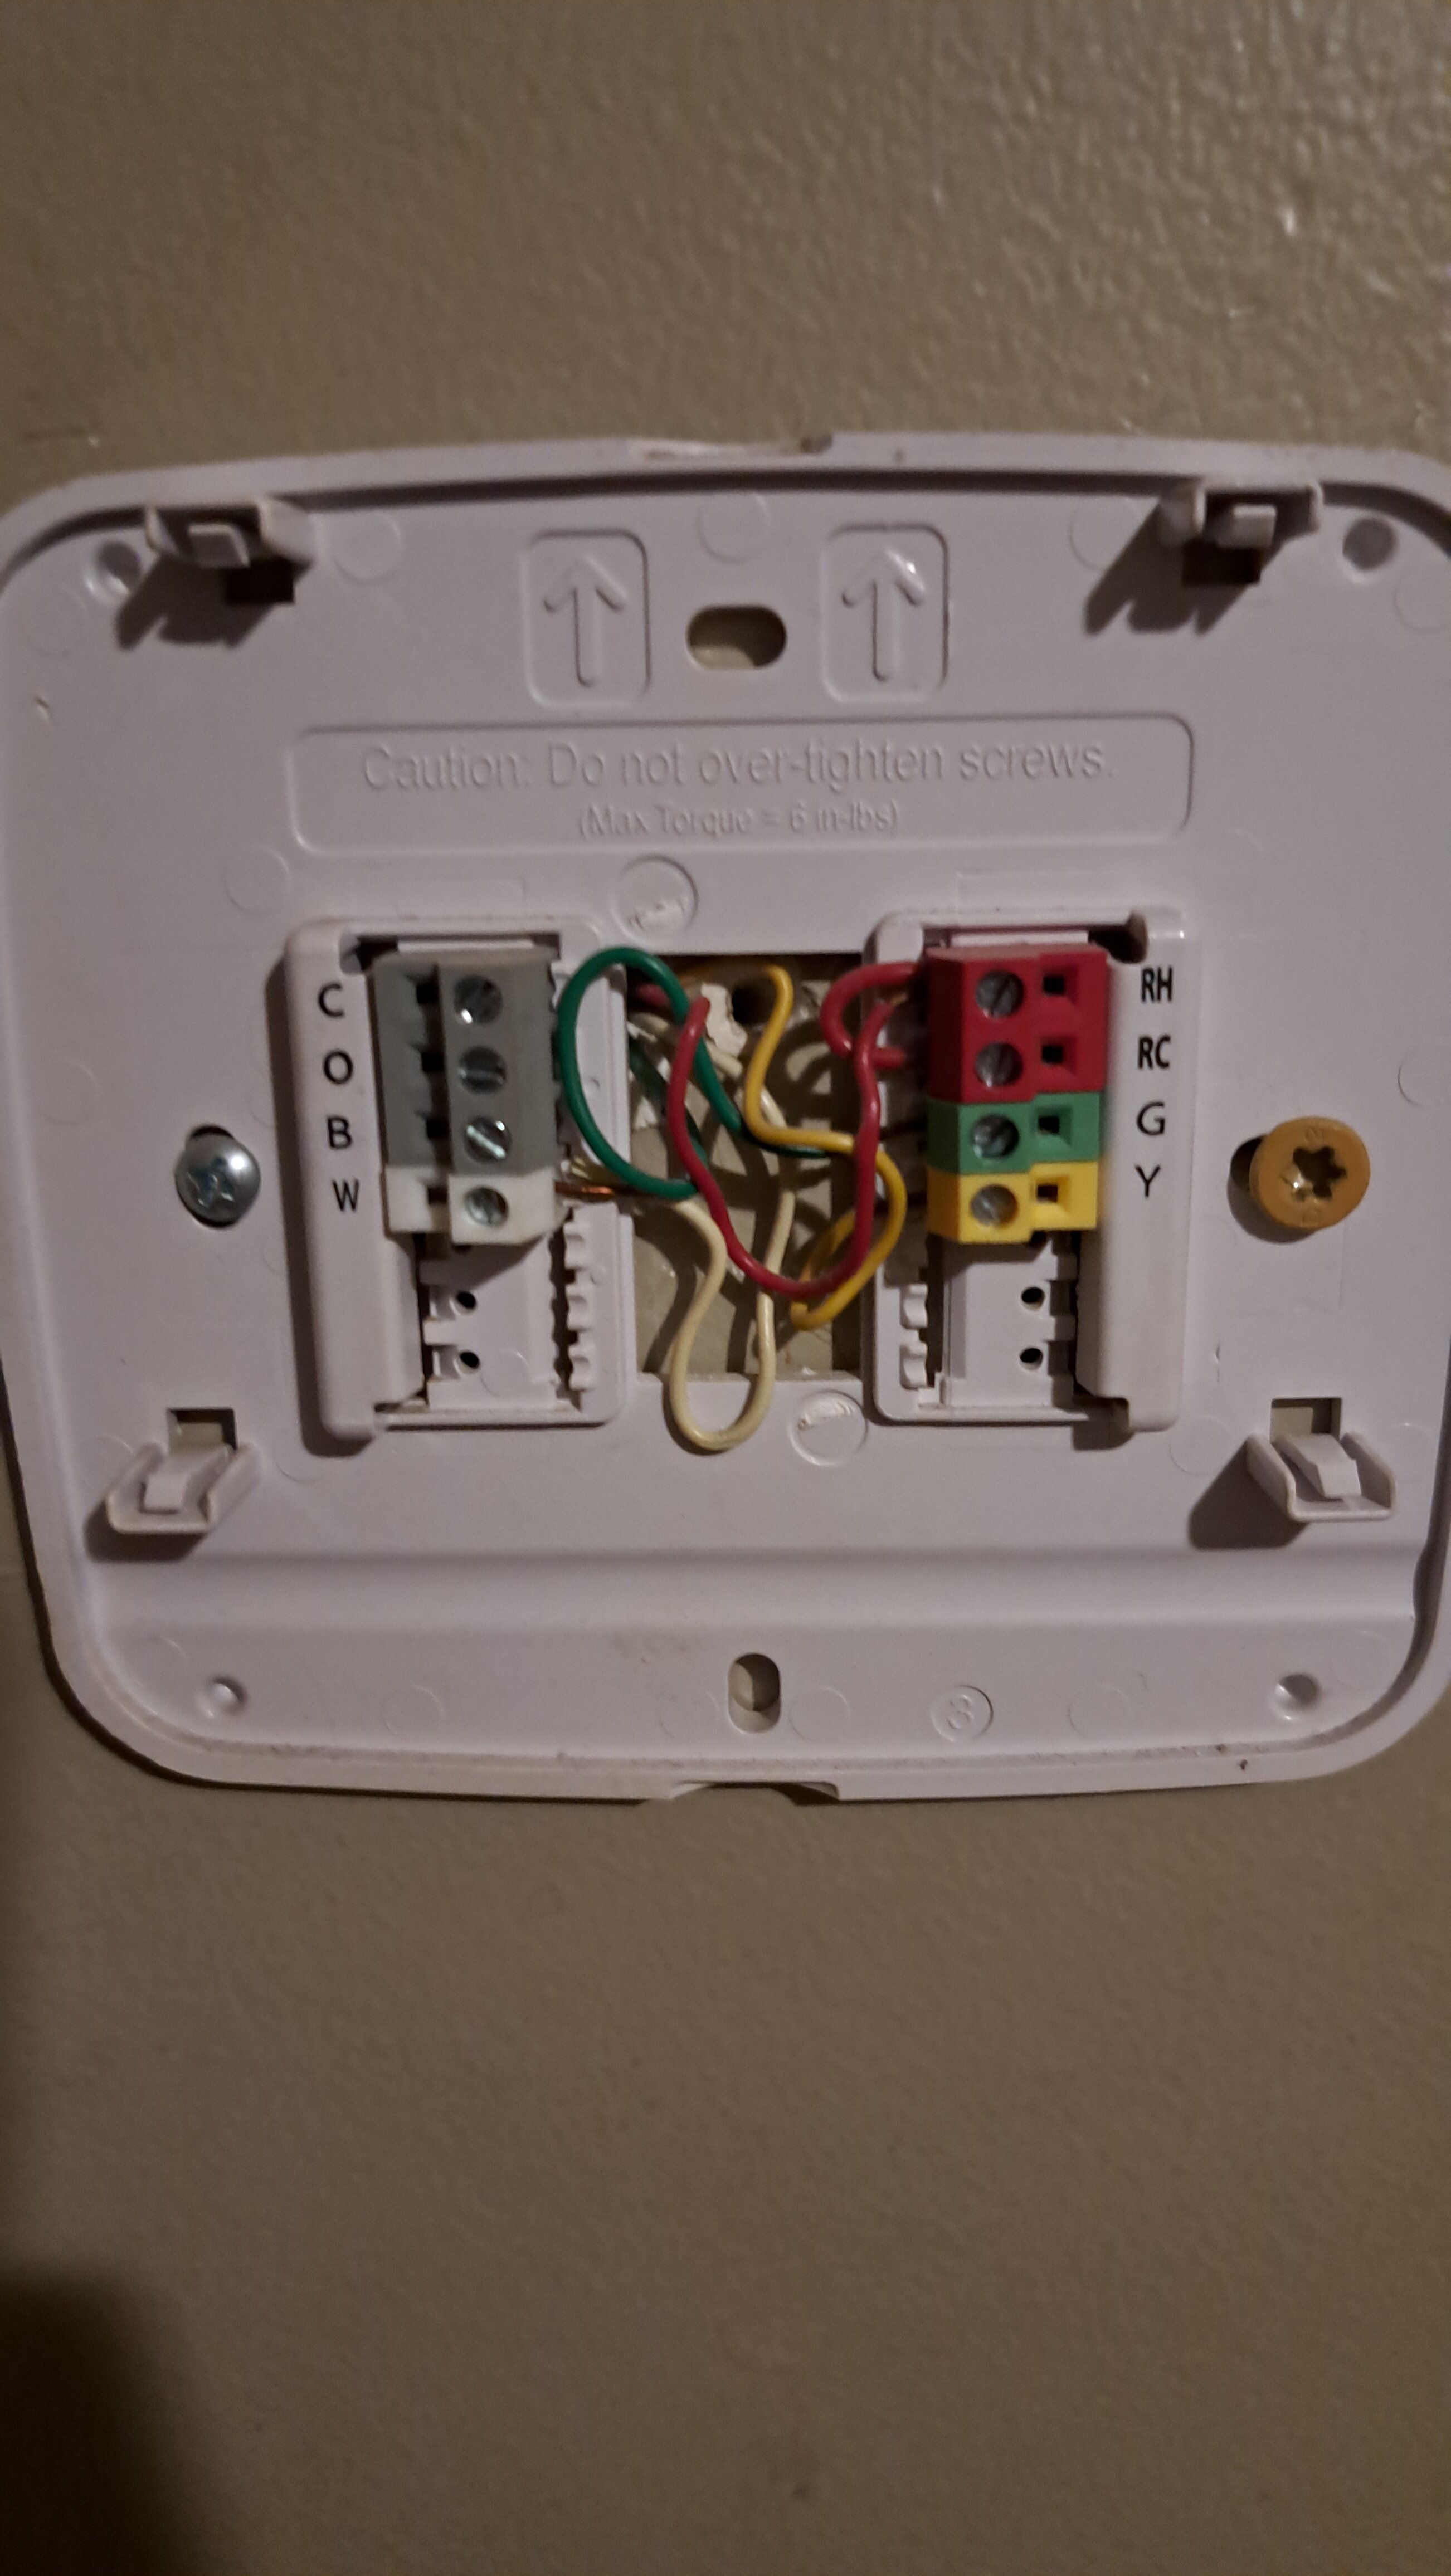 Wiring thermostat to run fan for heat exchanger instead of trying to run propane.